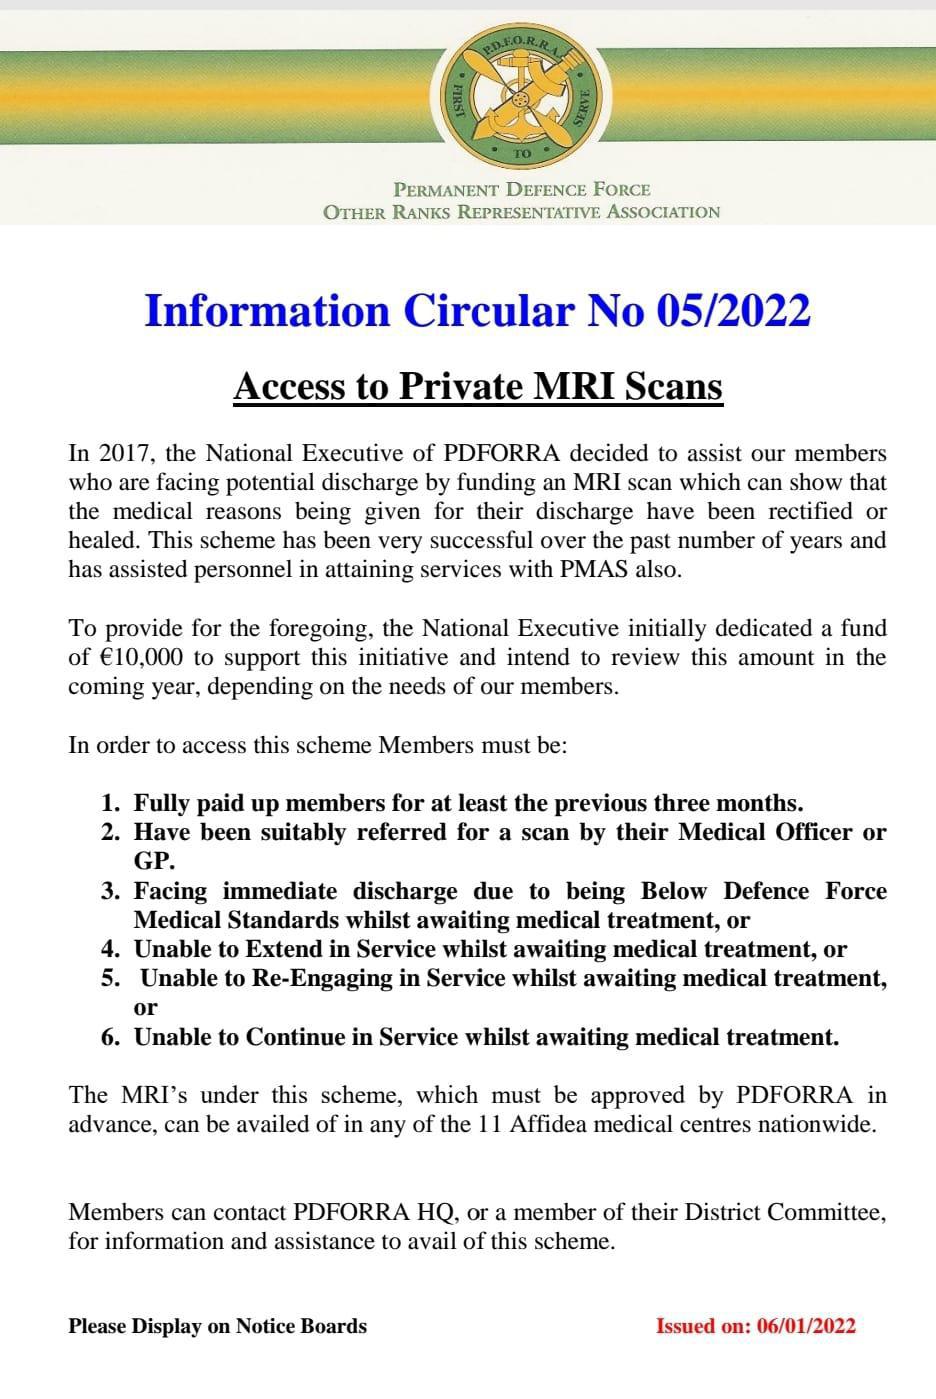 Information Circular No 05 of 22 - Access to Private MRI Scans